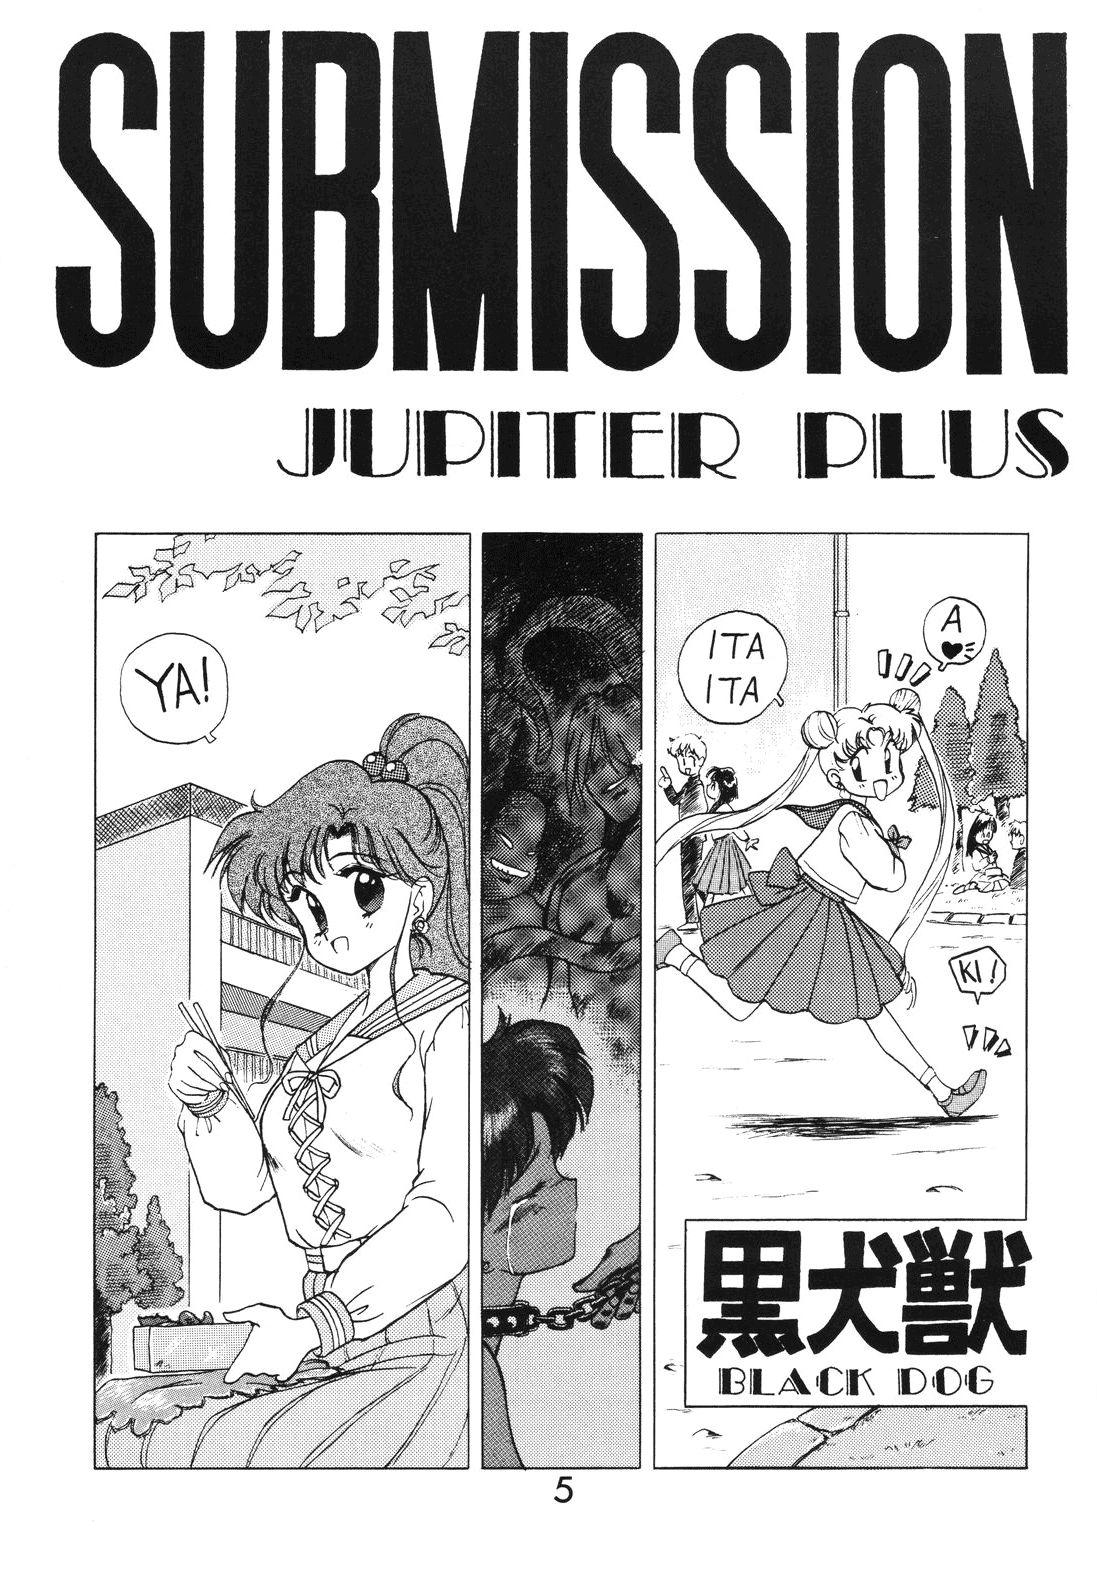 Titty Fuck SUBMISSION JUPITER PLUS - Sailor moon Sextape - Page 5